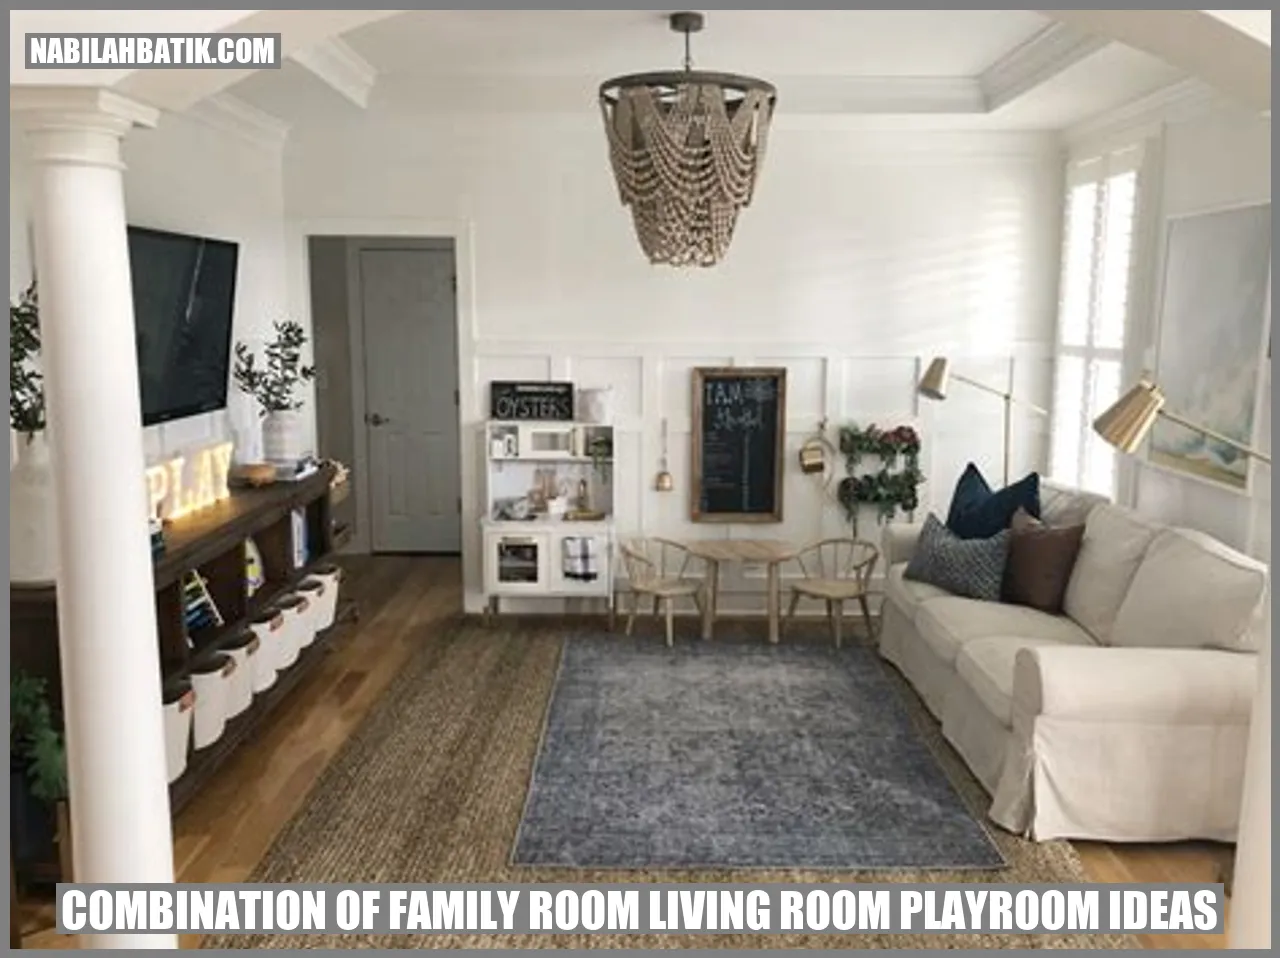 Combination of Family Room Living Room Playroom Ideas